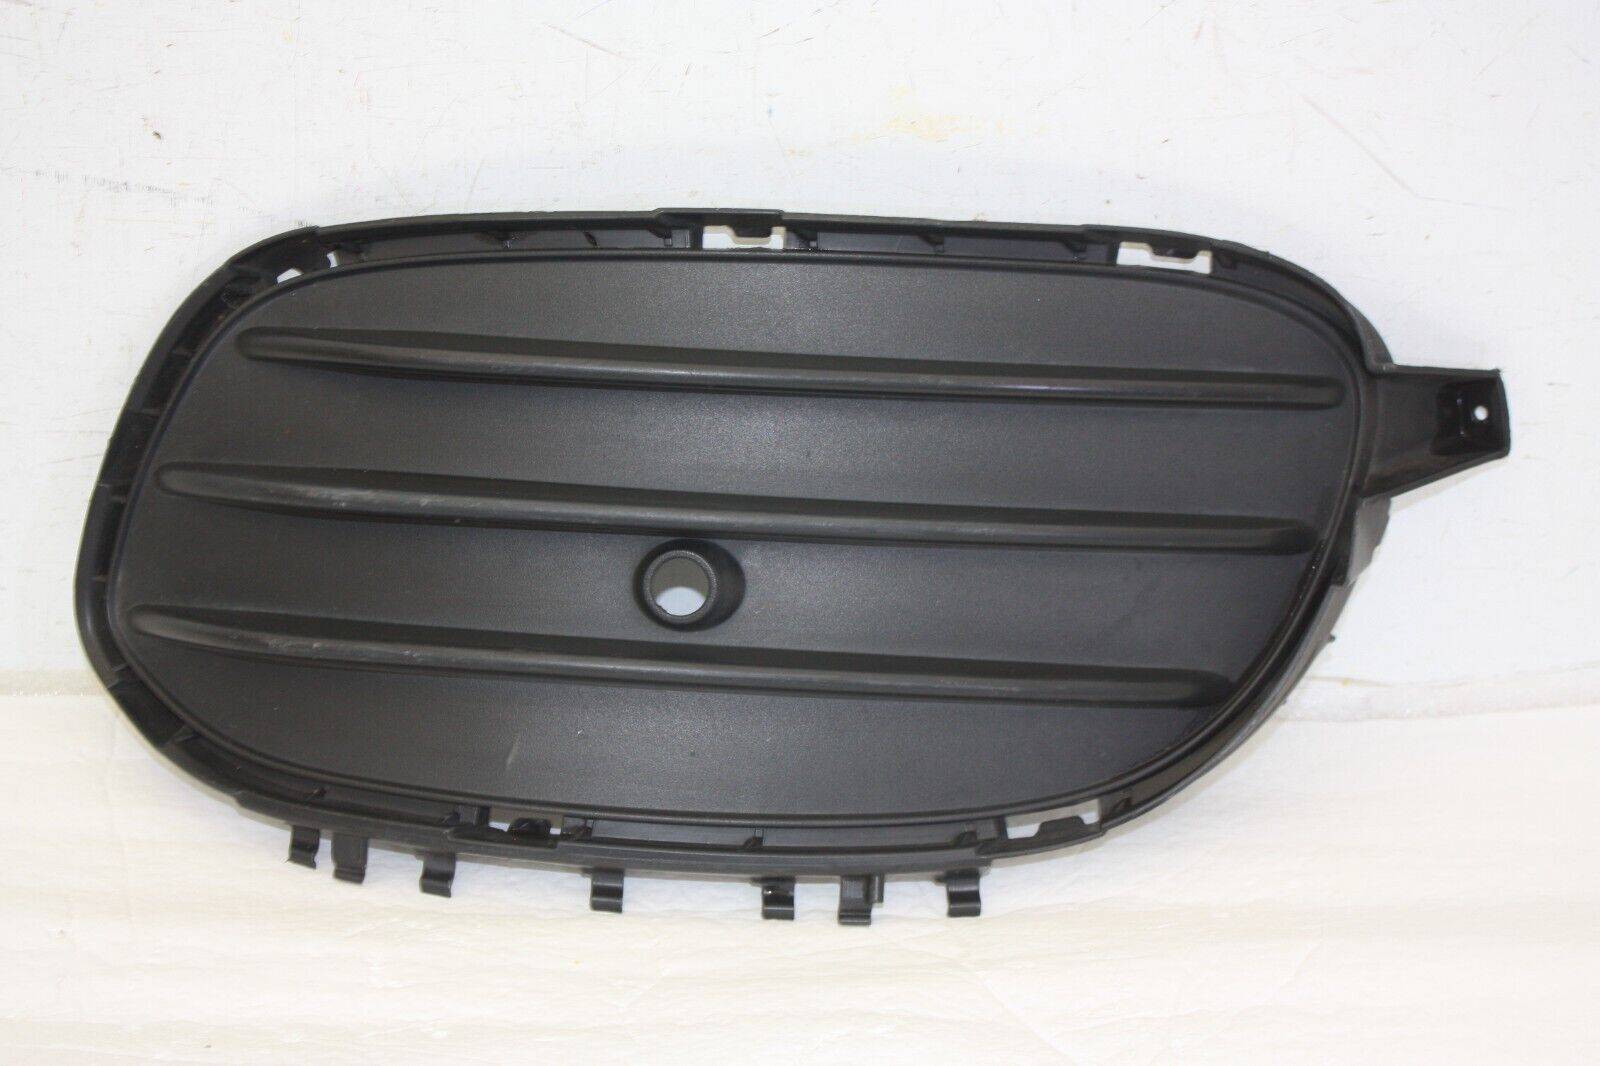 Mercedes GLA X156 AMG Front Bumper Right Side Grill 2017 TO 2020 A1568858800 176256956610